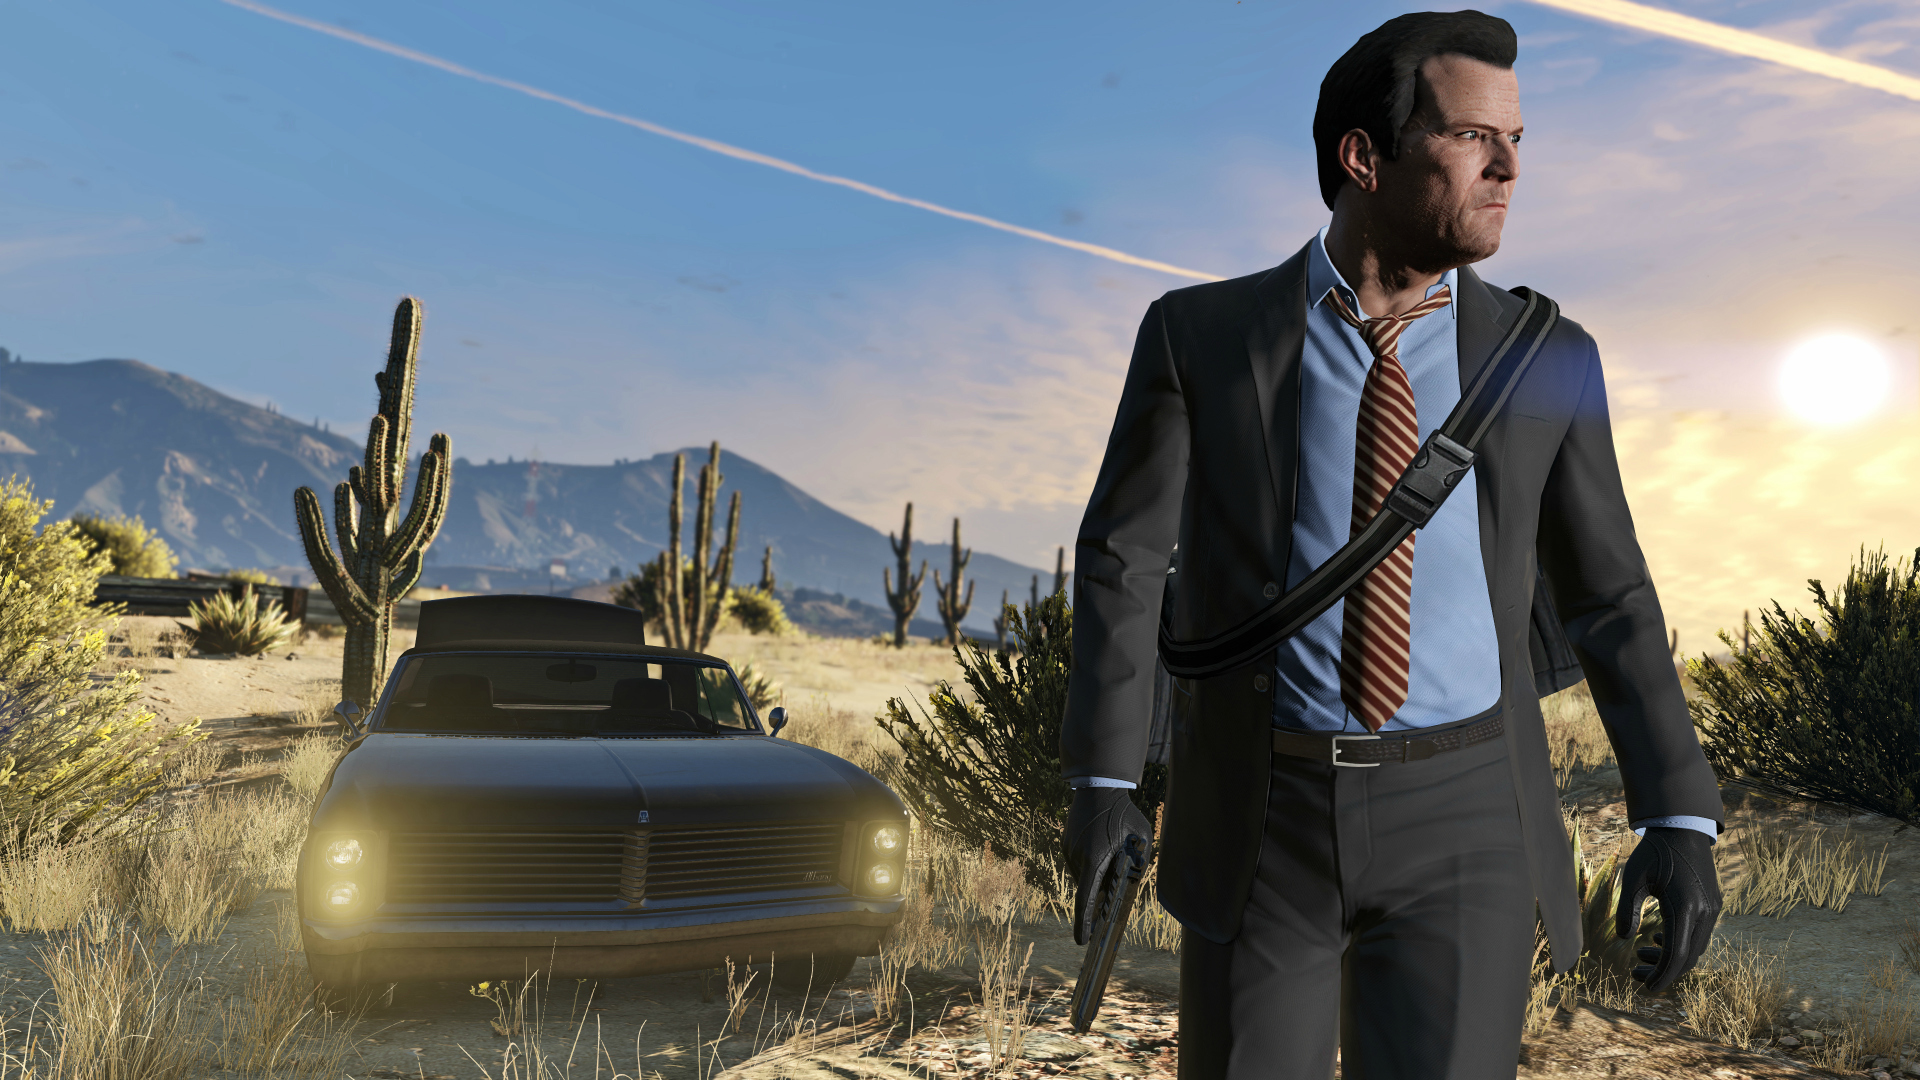 A shot of Michael from GTA 5. He's holding a pistol and stands in front of a black muscle car.